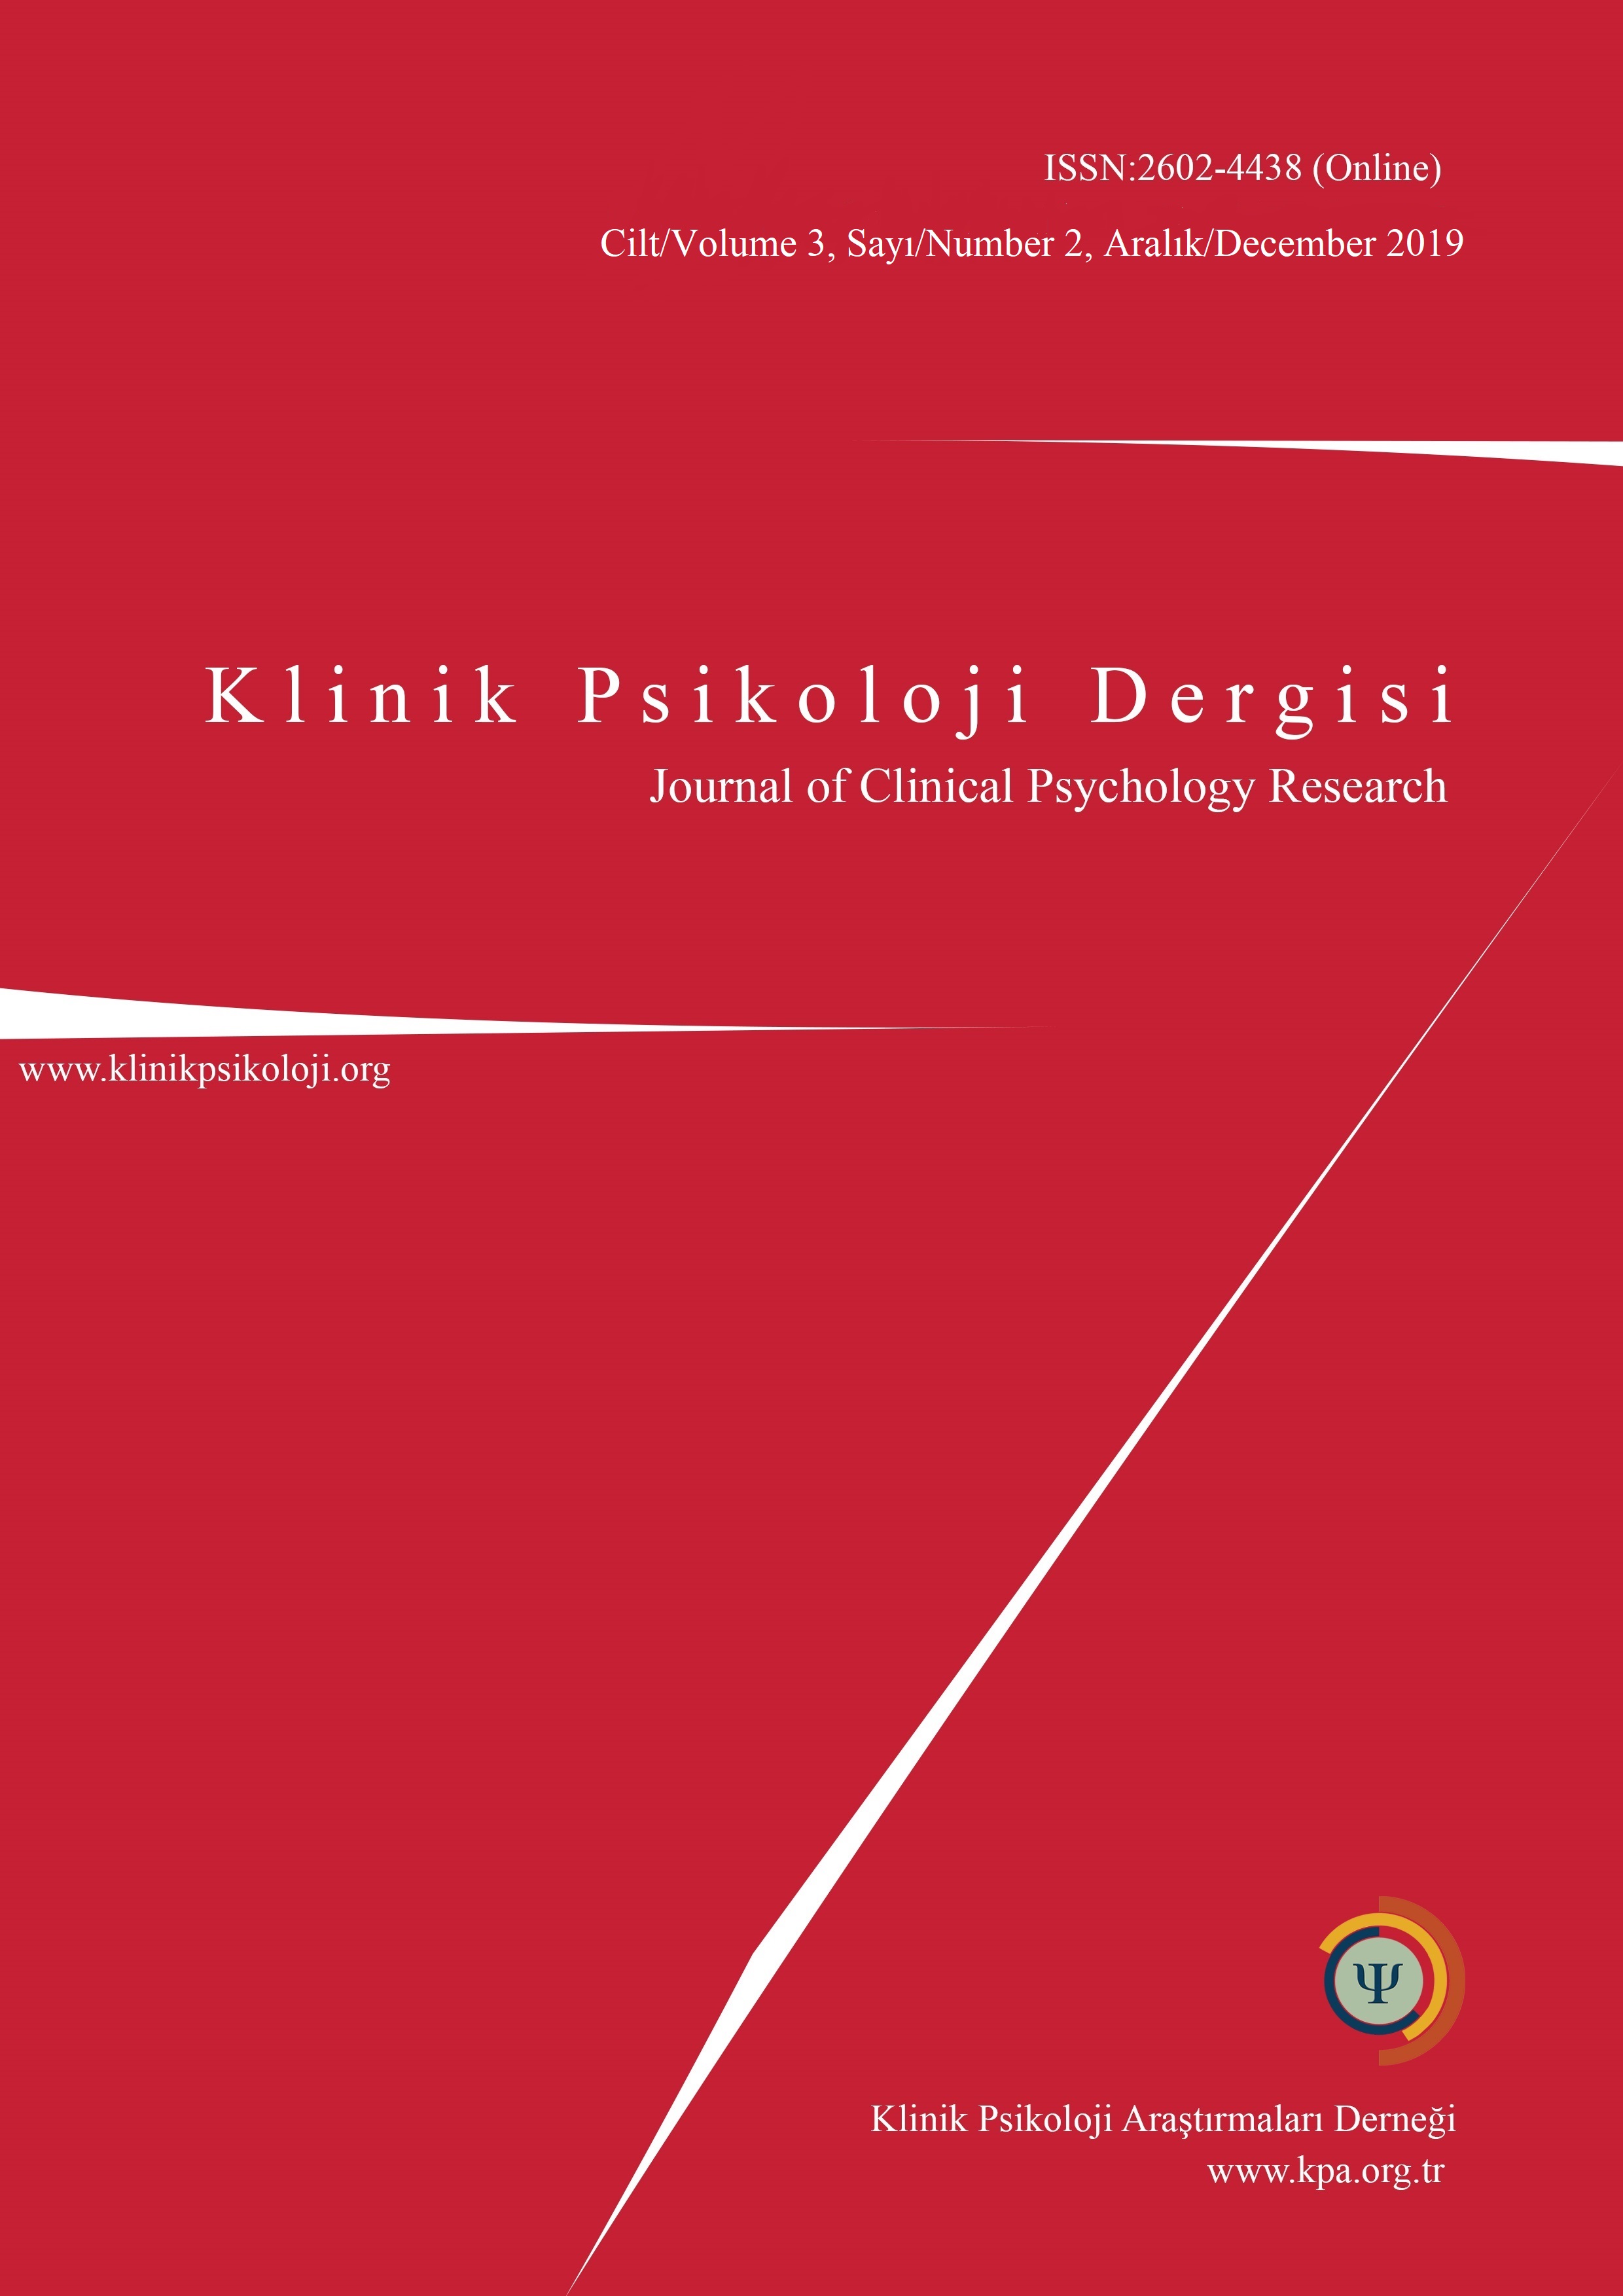 Teaching Psychology ethics in Turkey: The evaluation of a study in terms of adoption of ethical behavior, moral values and ethical rules Cover Image